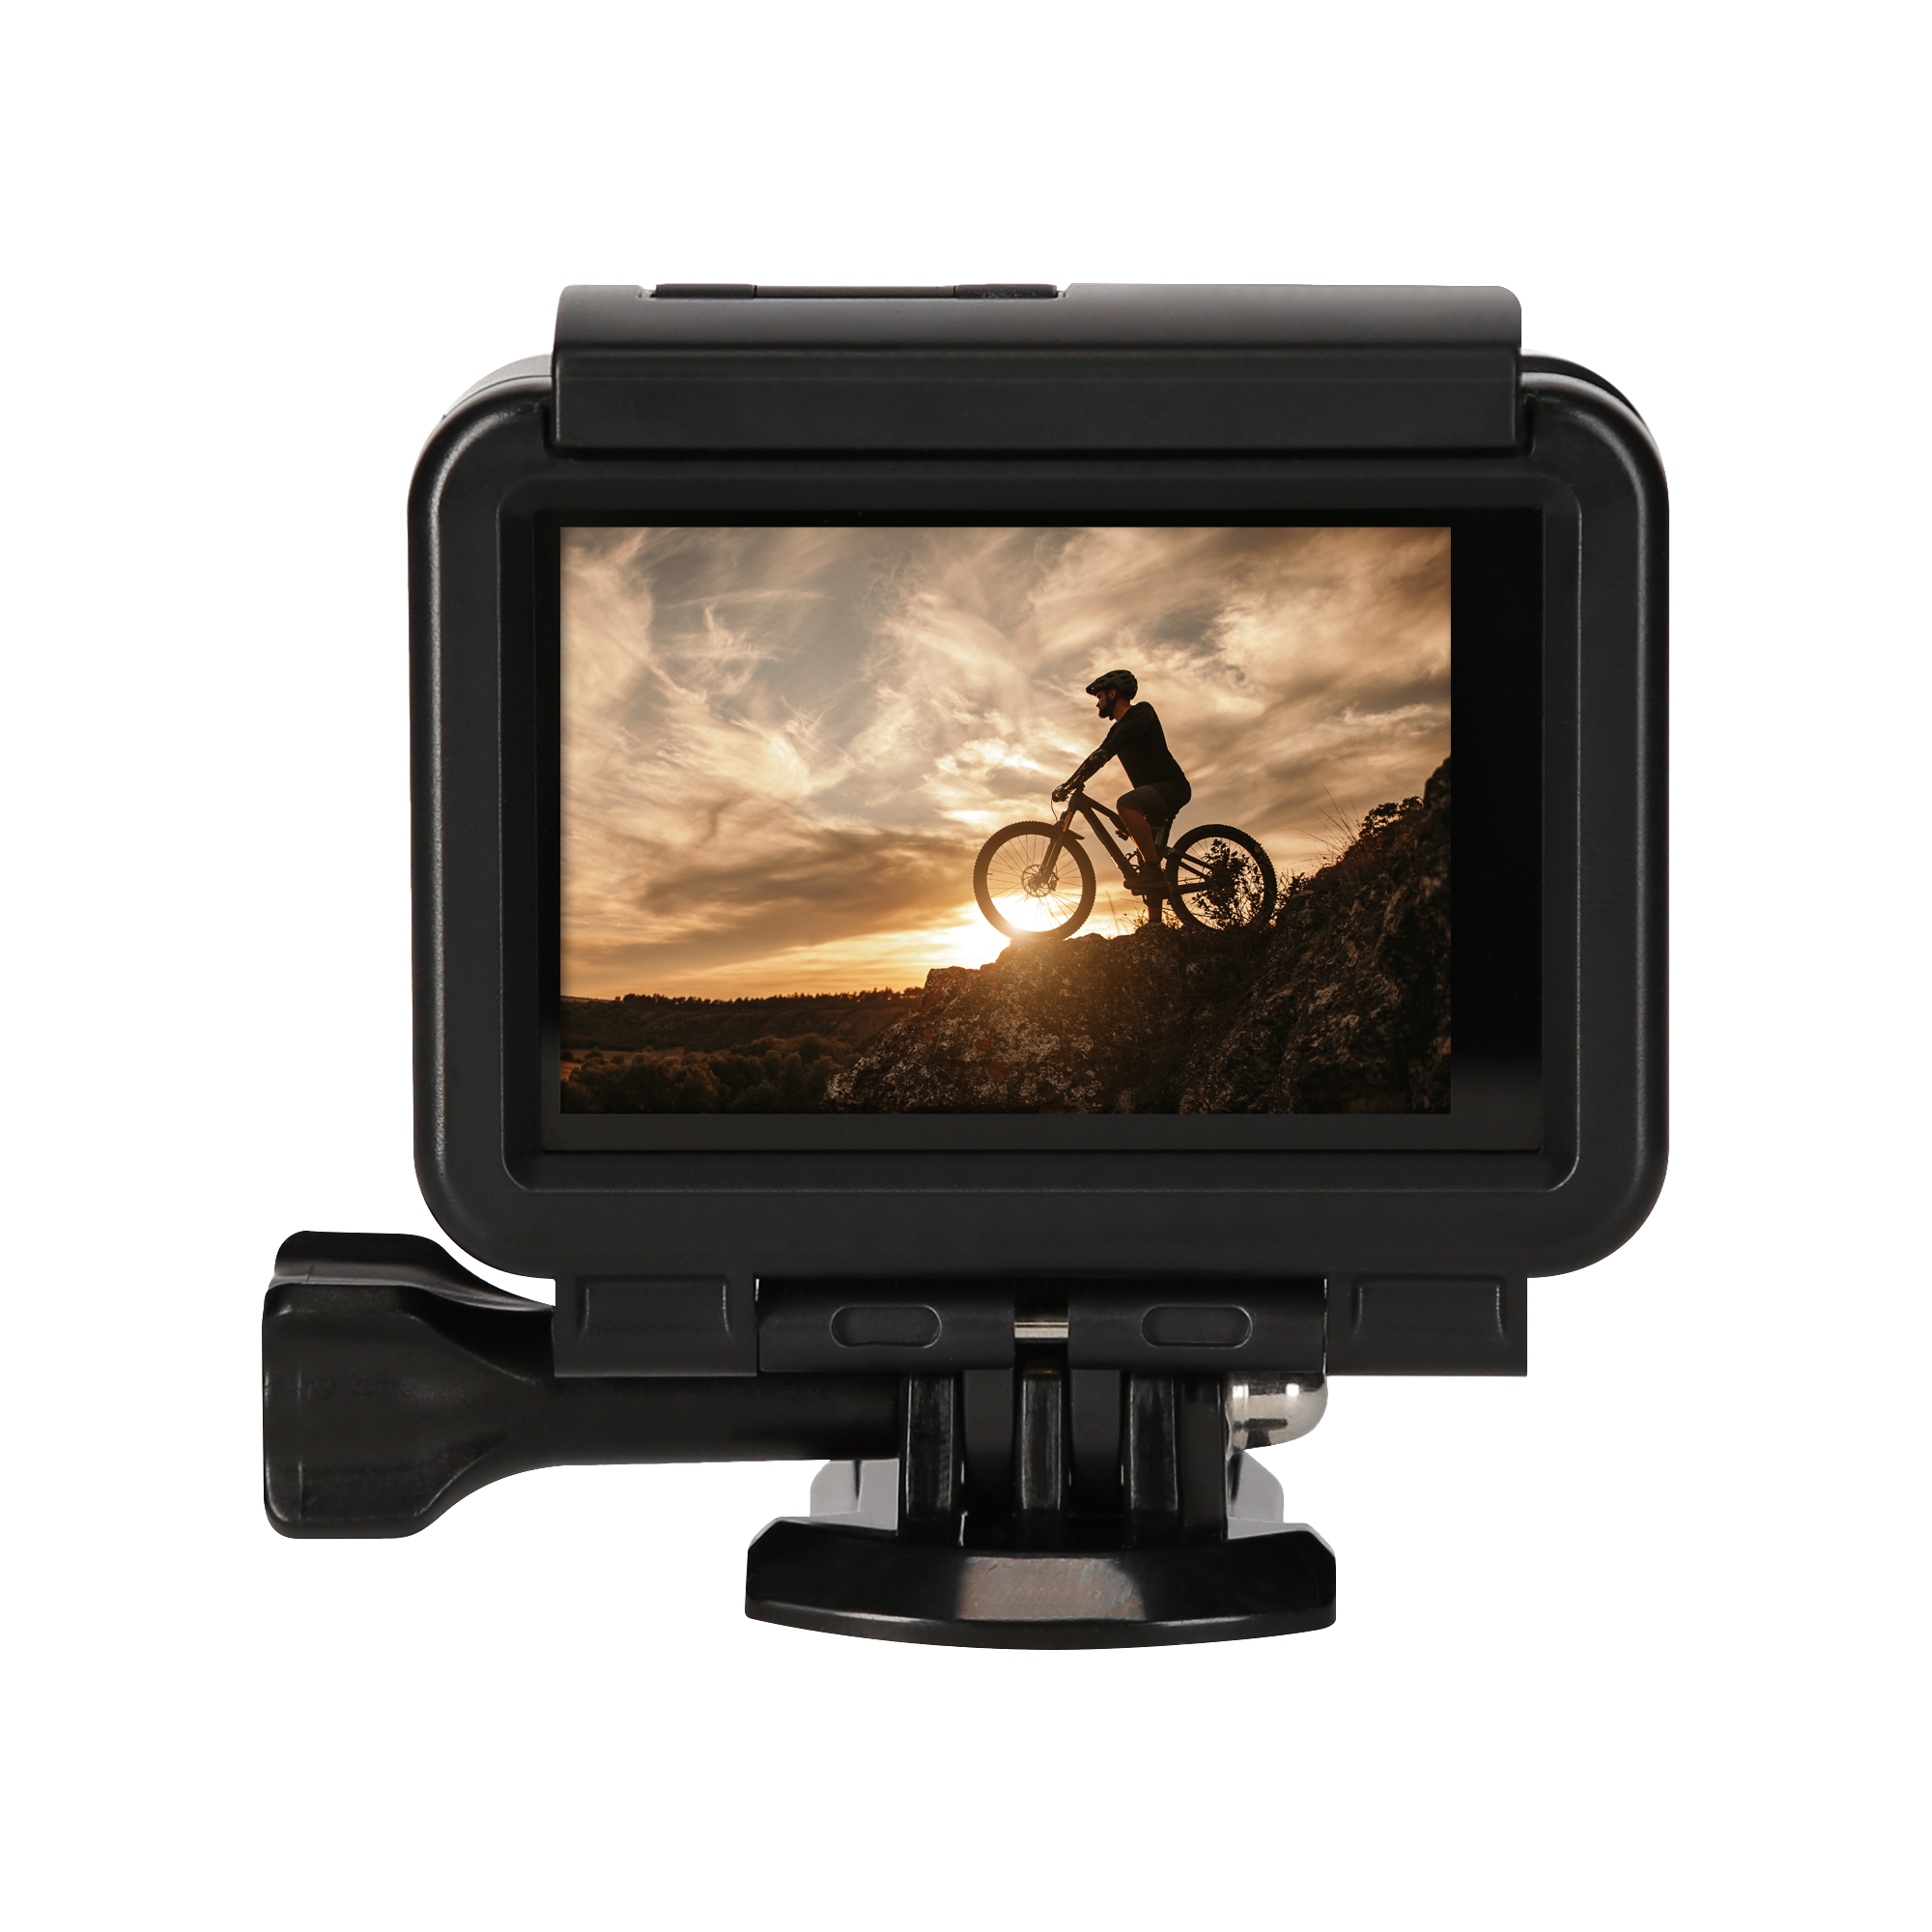 ROLLEI Actioncam one , Touchscreen Actioncam